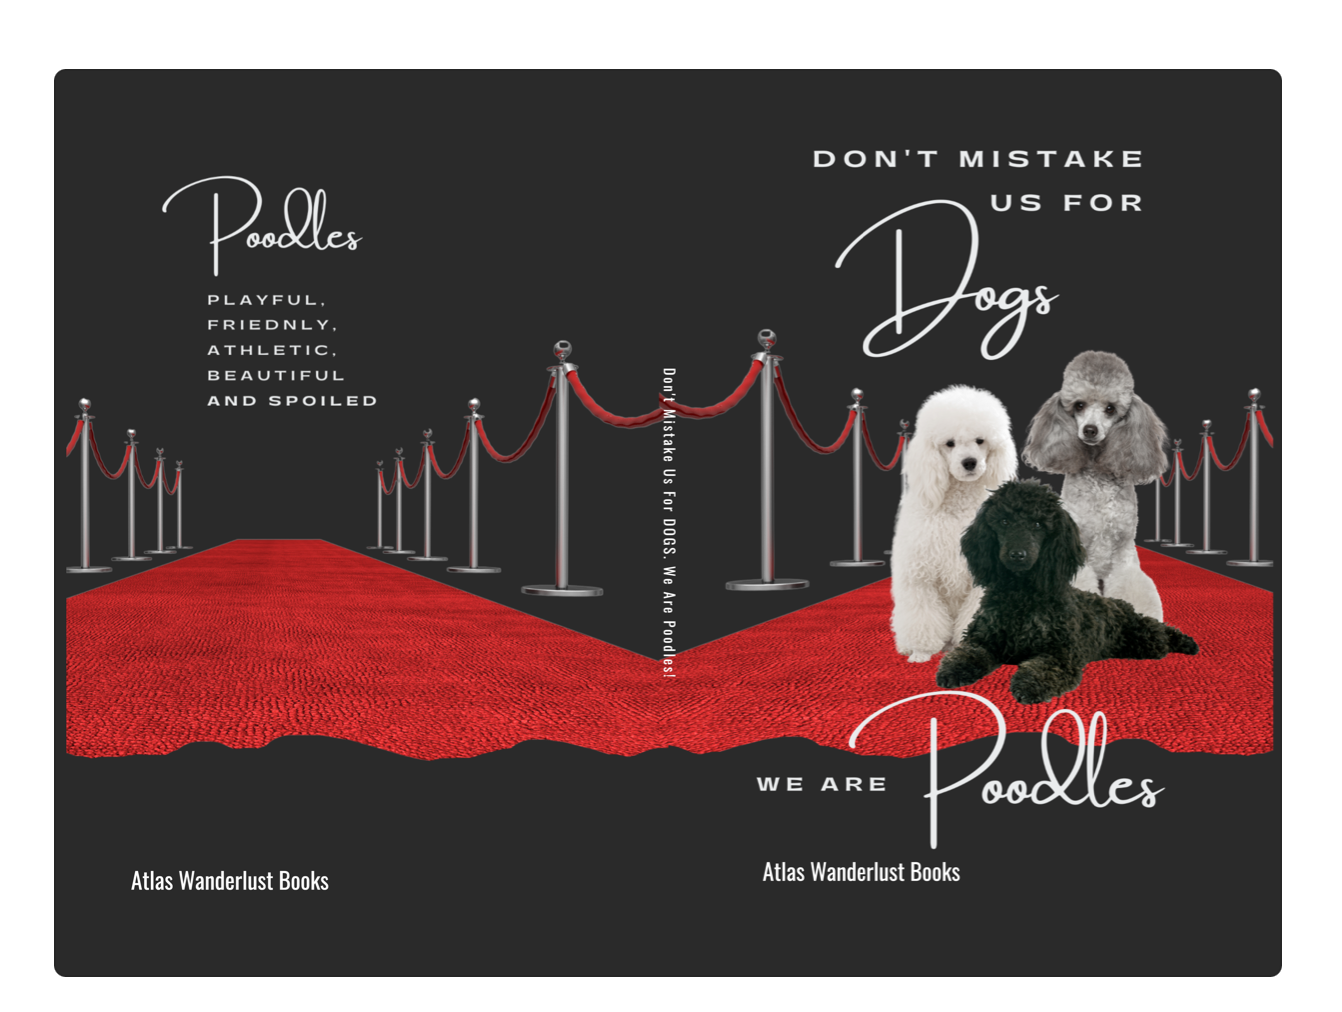 Poodles: Don't Mistake Us For Dogs. We Are Poodles, notebook journal, Poodle lovers - The Dapper Dogg